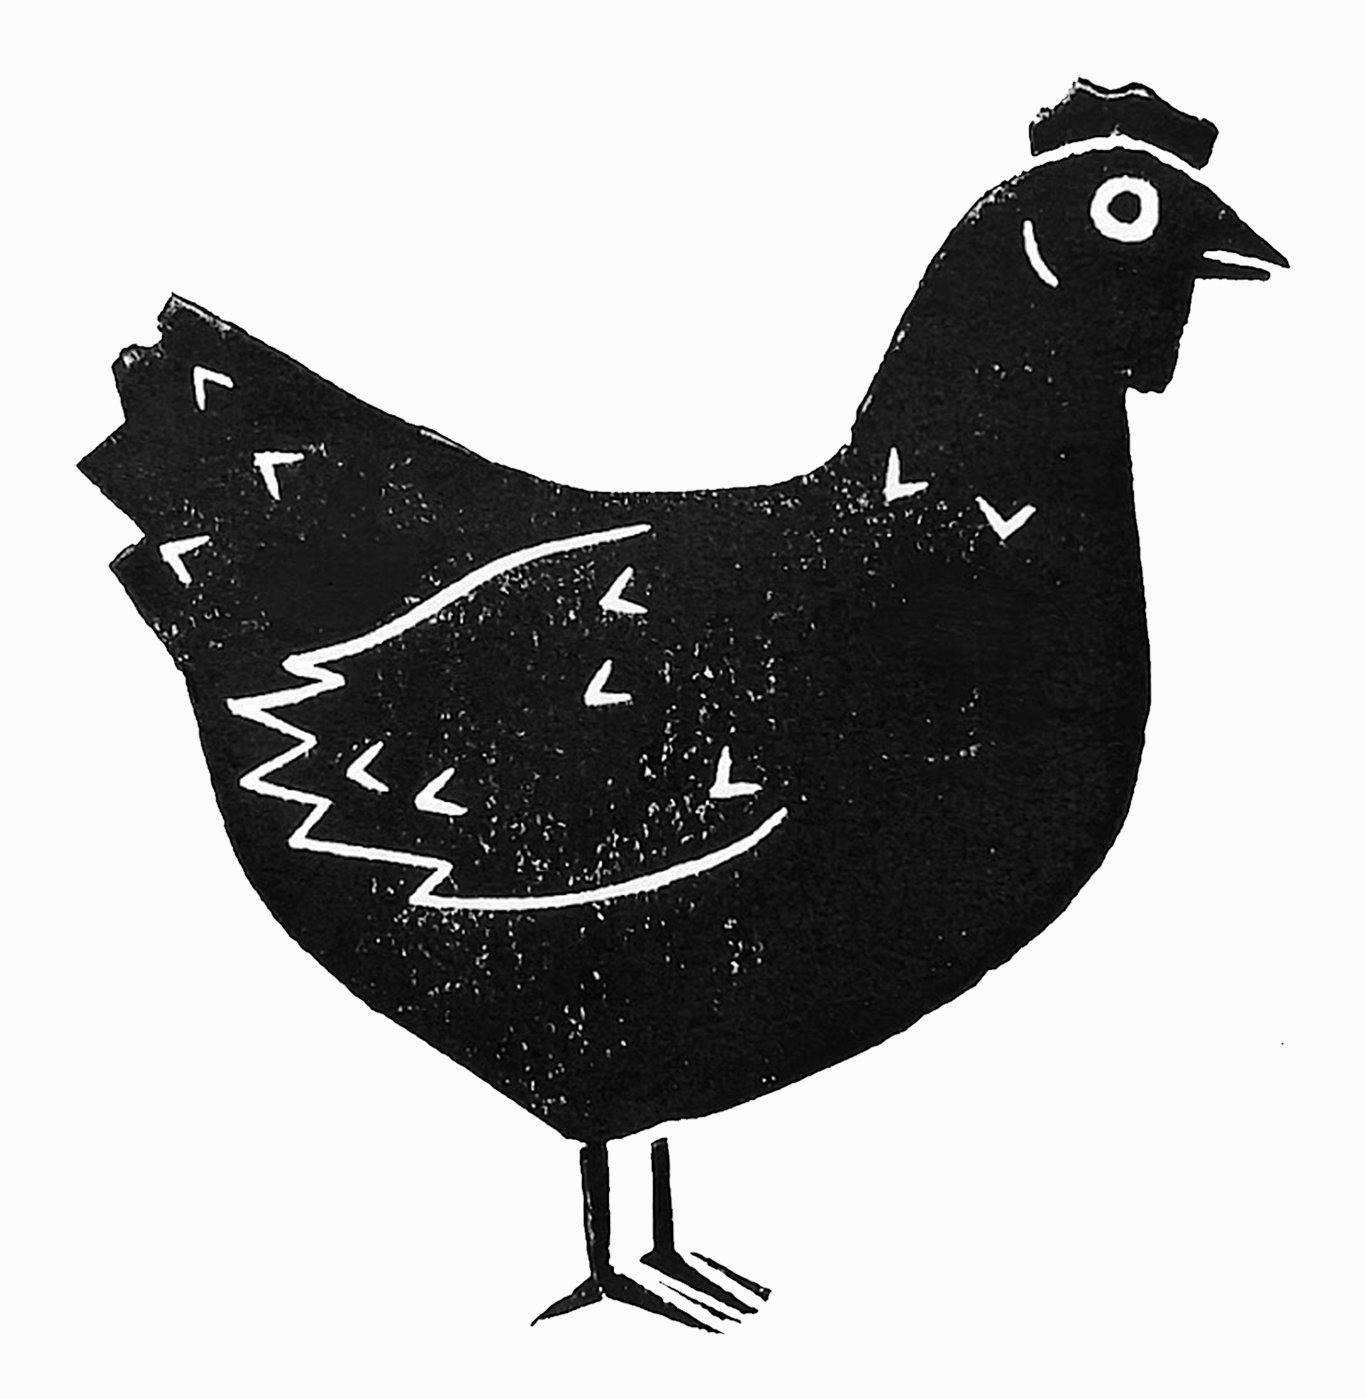 Somewhat grainy black-and-white linocut print of a simply stylized chicken, centered on a slightly off-white background.